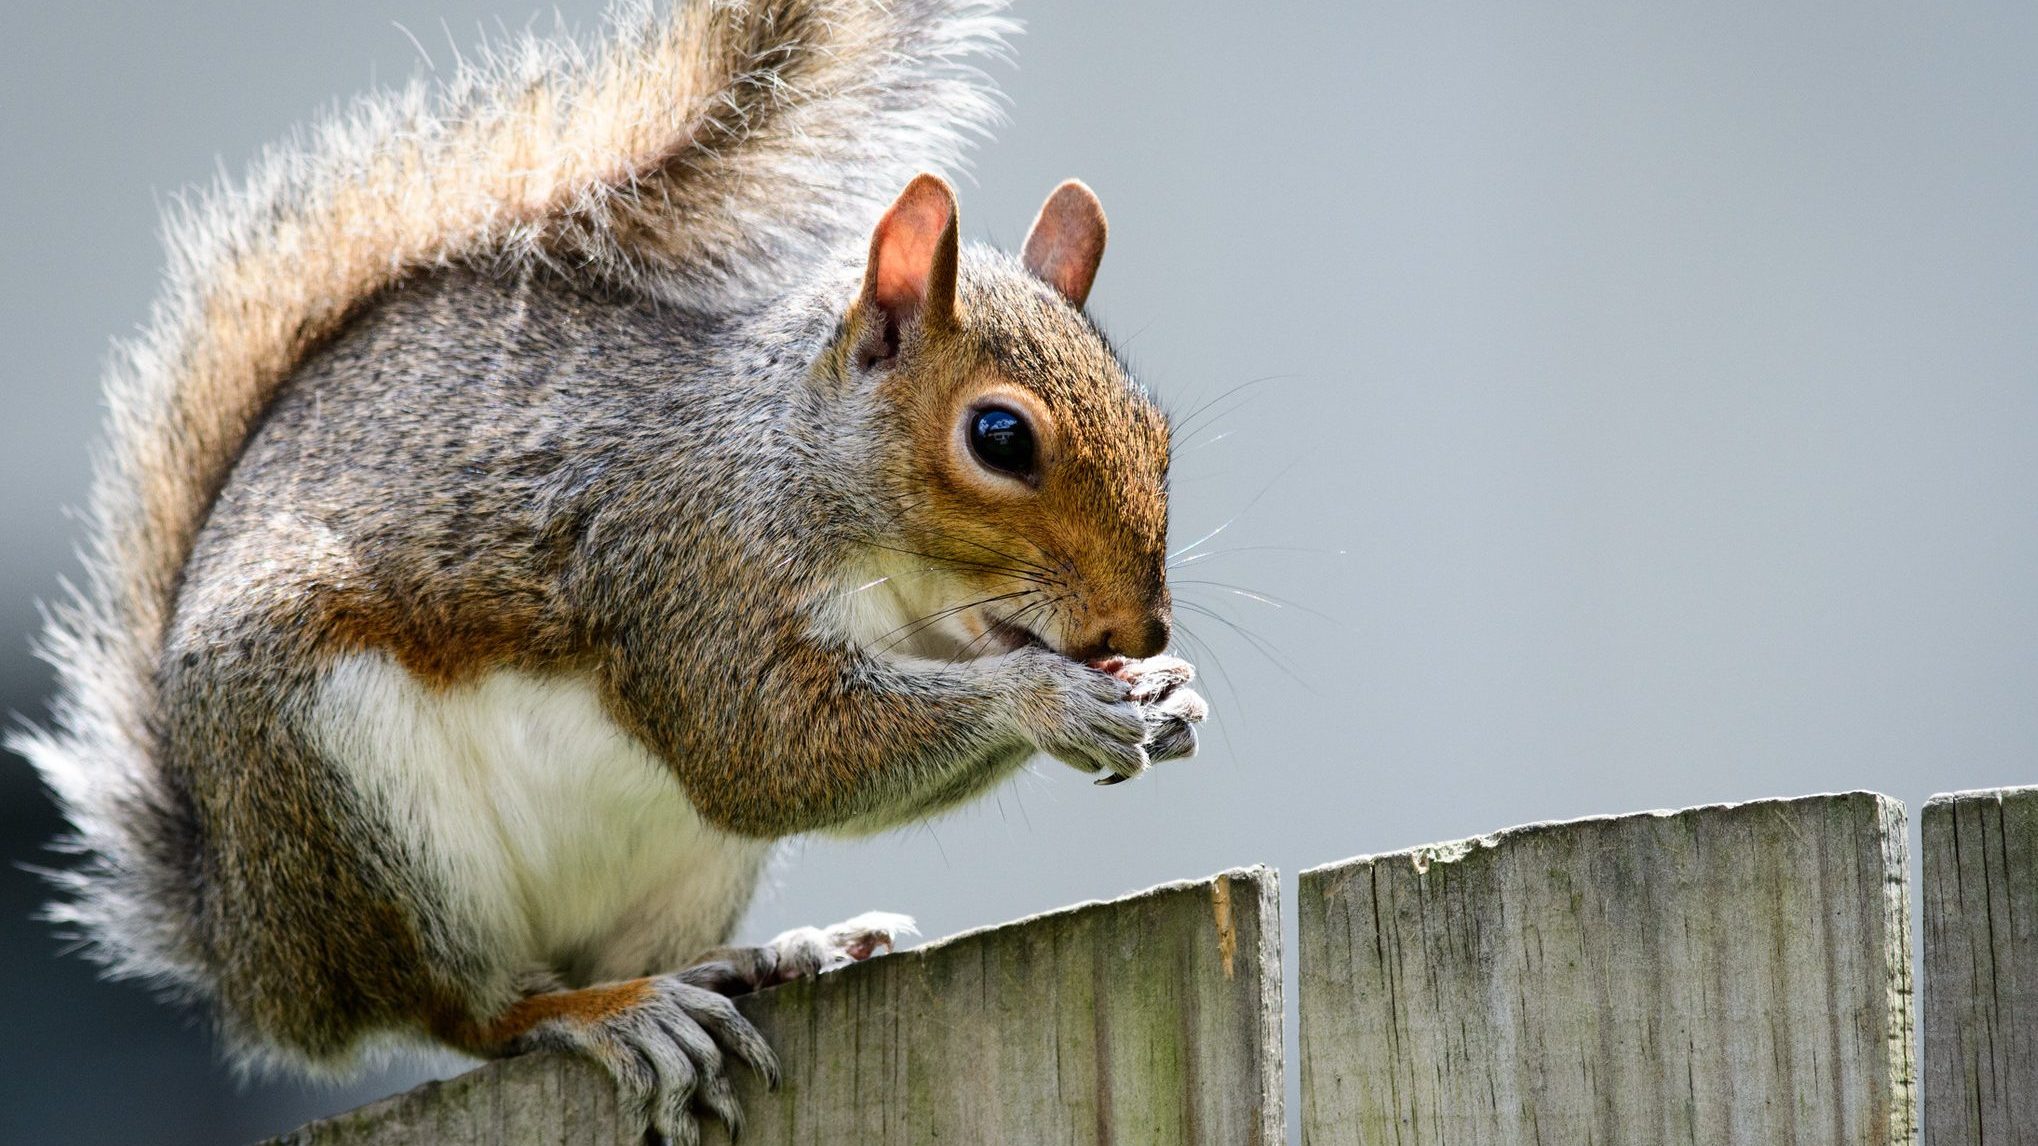 squirrel sitting on a fence eating something